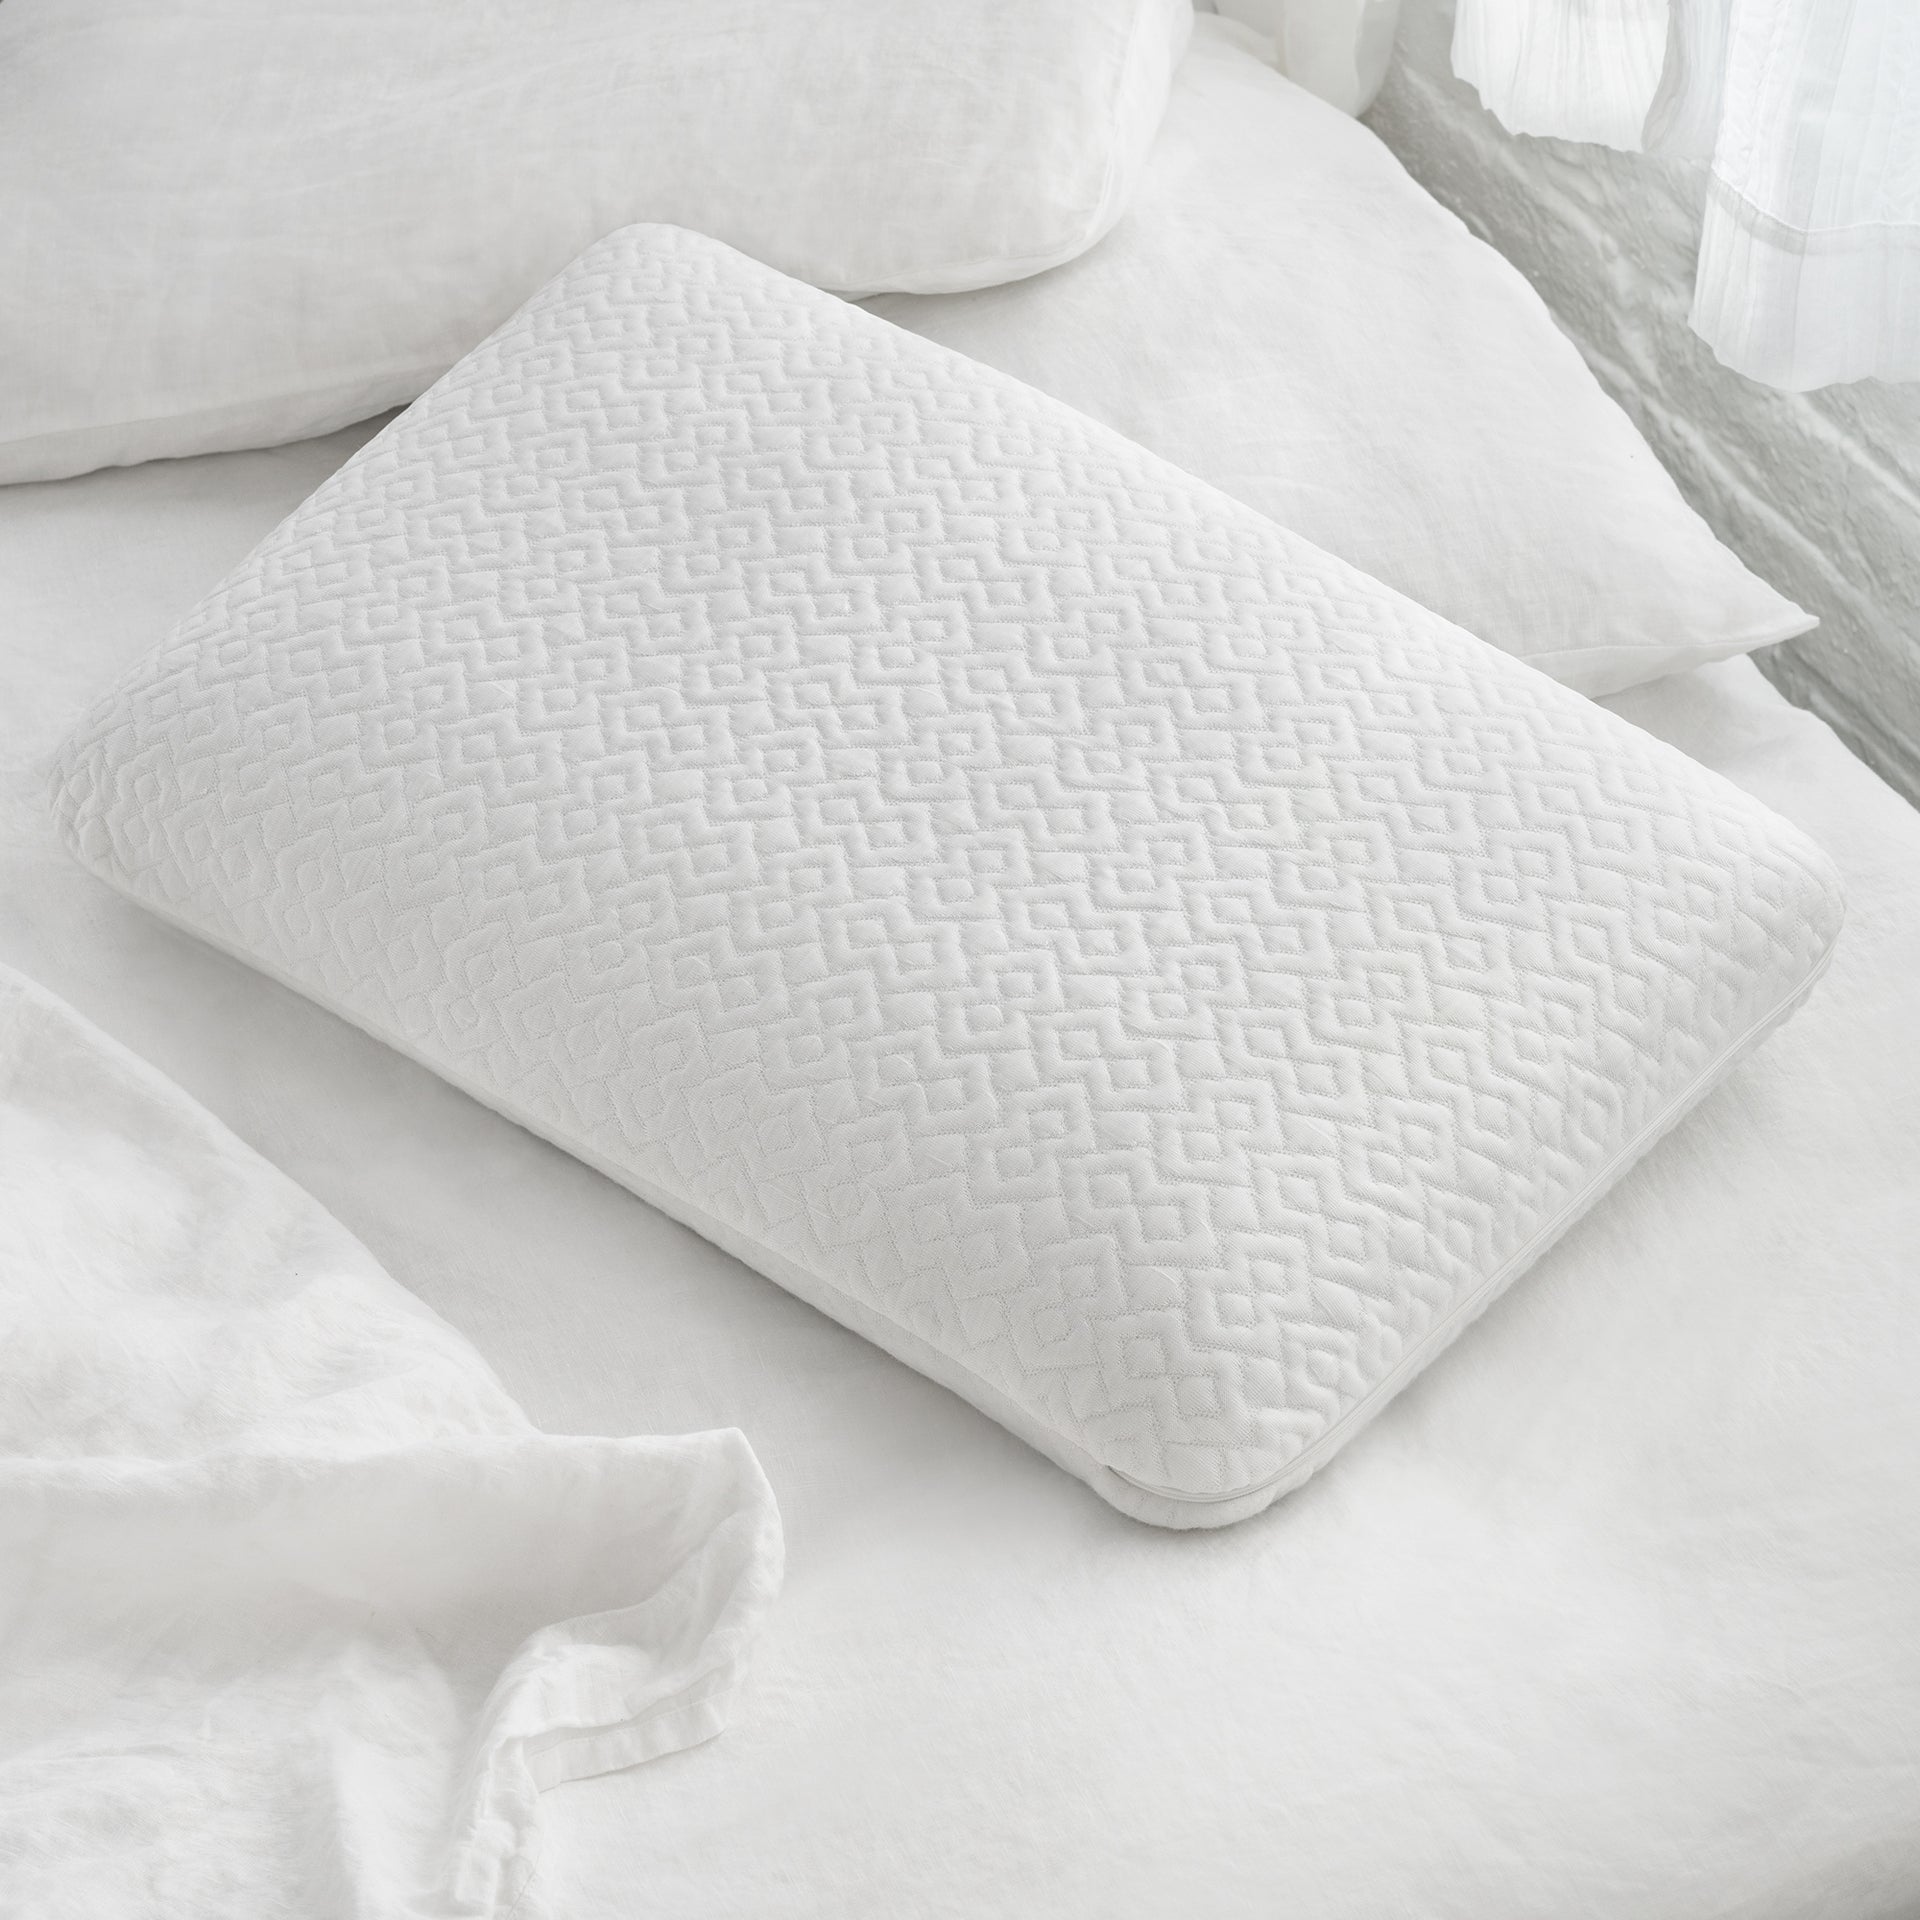 The Novaform Lasting Cool Pillow resting on an unmade bed with white pillows and sheets around it